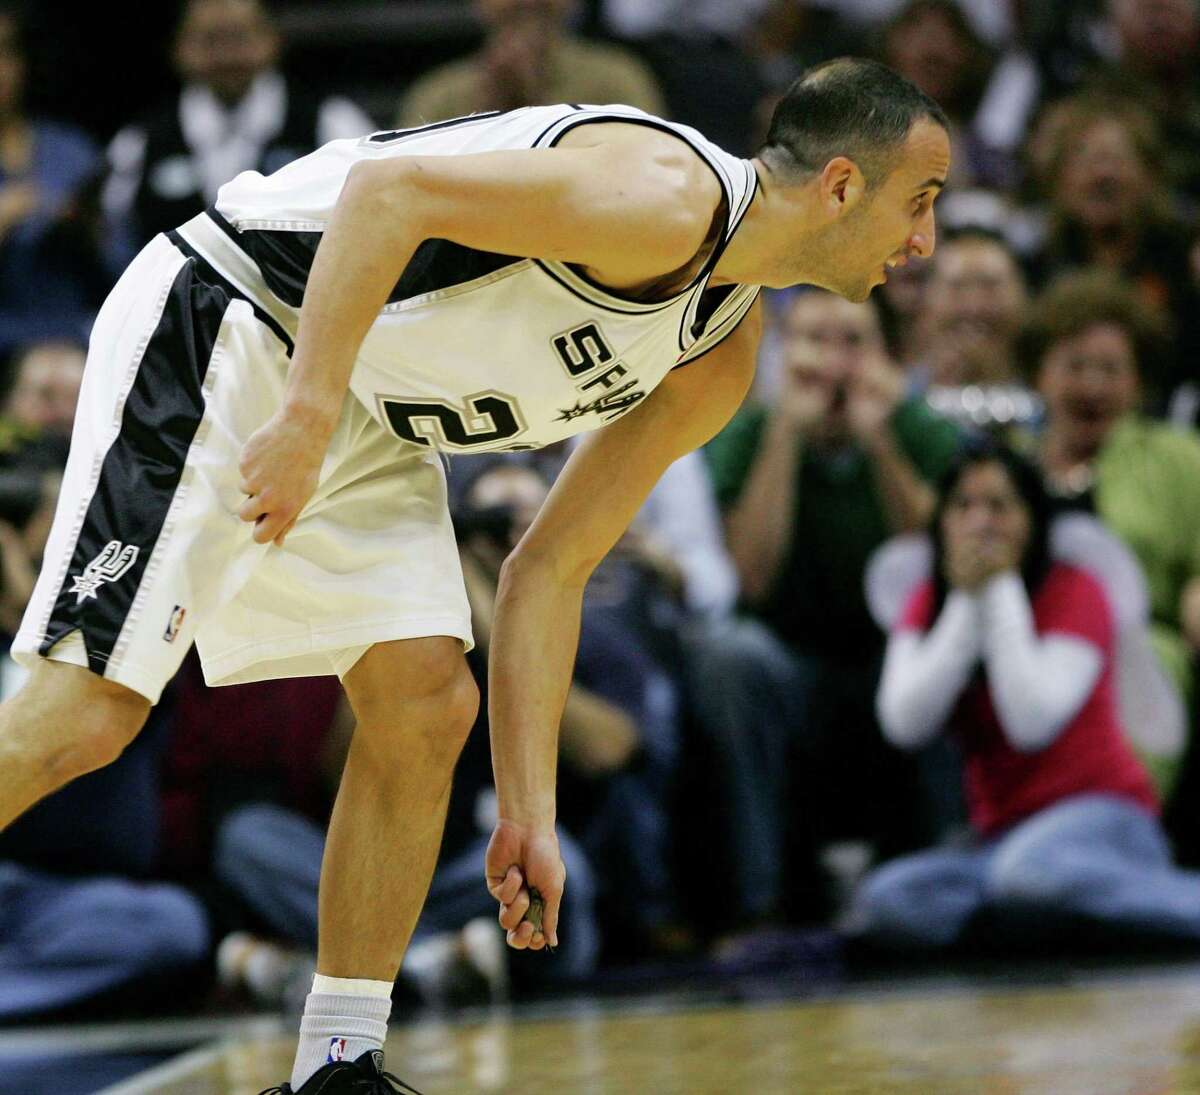 Manu Ginobili: The South American Who Conquered The NBA.